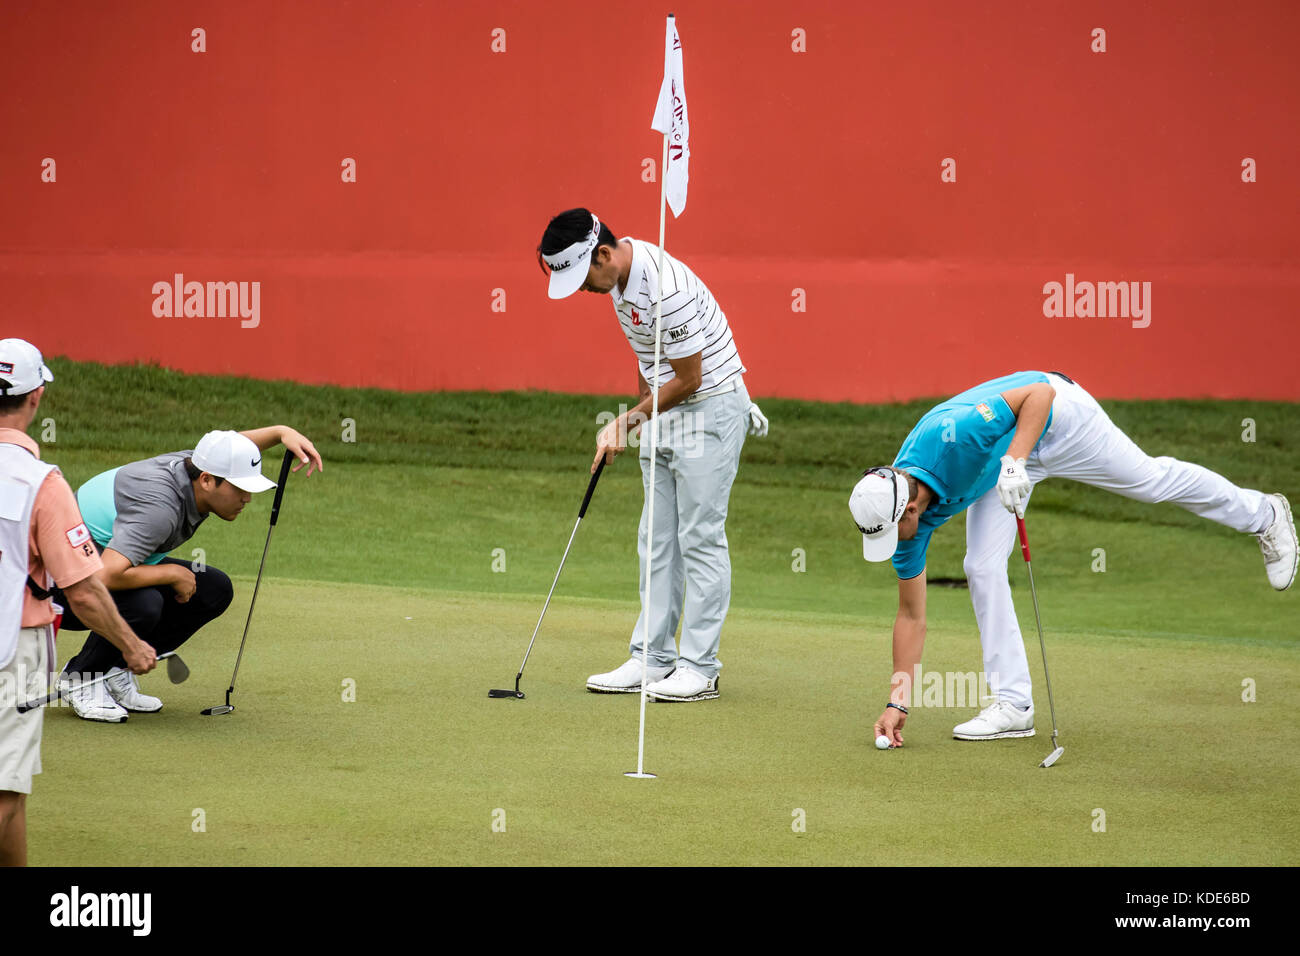 Kuala Lumpur, Malaysia. 13th October, 2017. (R to L) Richy Werenski, Kevin Na and Richard Lee preparing their putt line up on the 18th green at PGA CIMB Classic 2017 golf tournament in Kuala Lumpur, Malaysia. © Danny Chan/Alamy Live News. Stock Photo